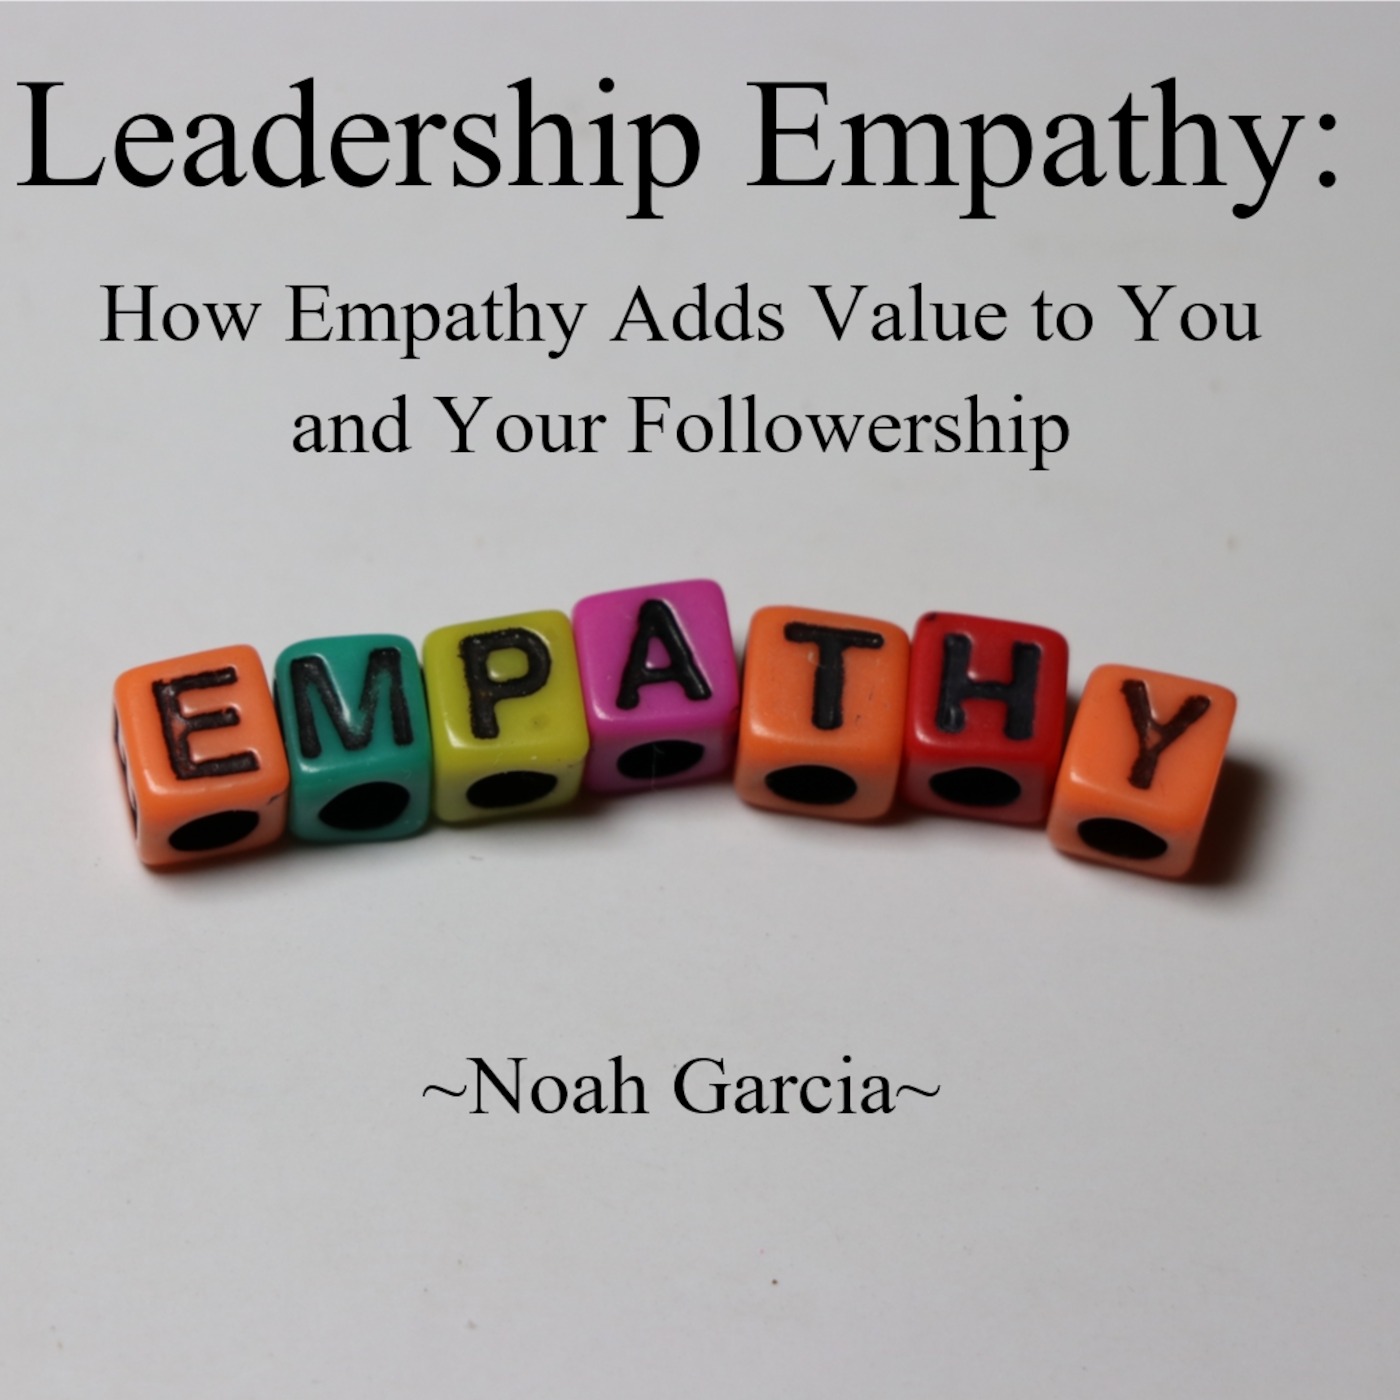 Leadership Empathy: How Empathy Adds Value to You and Your Followership